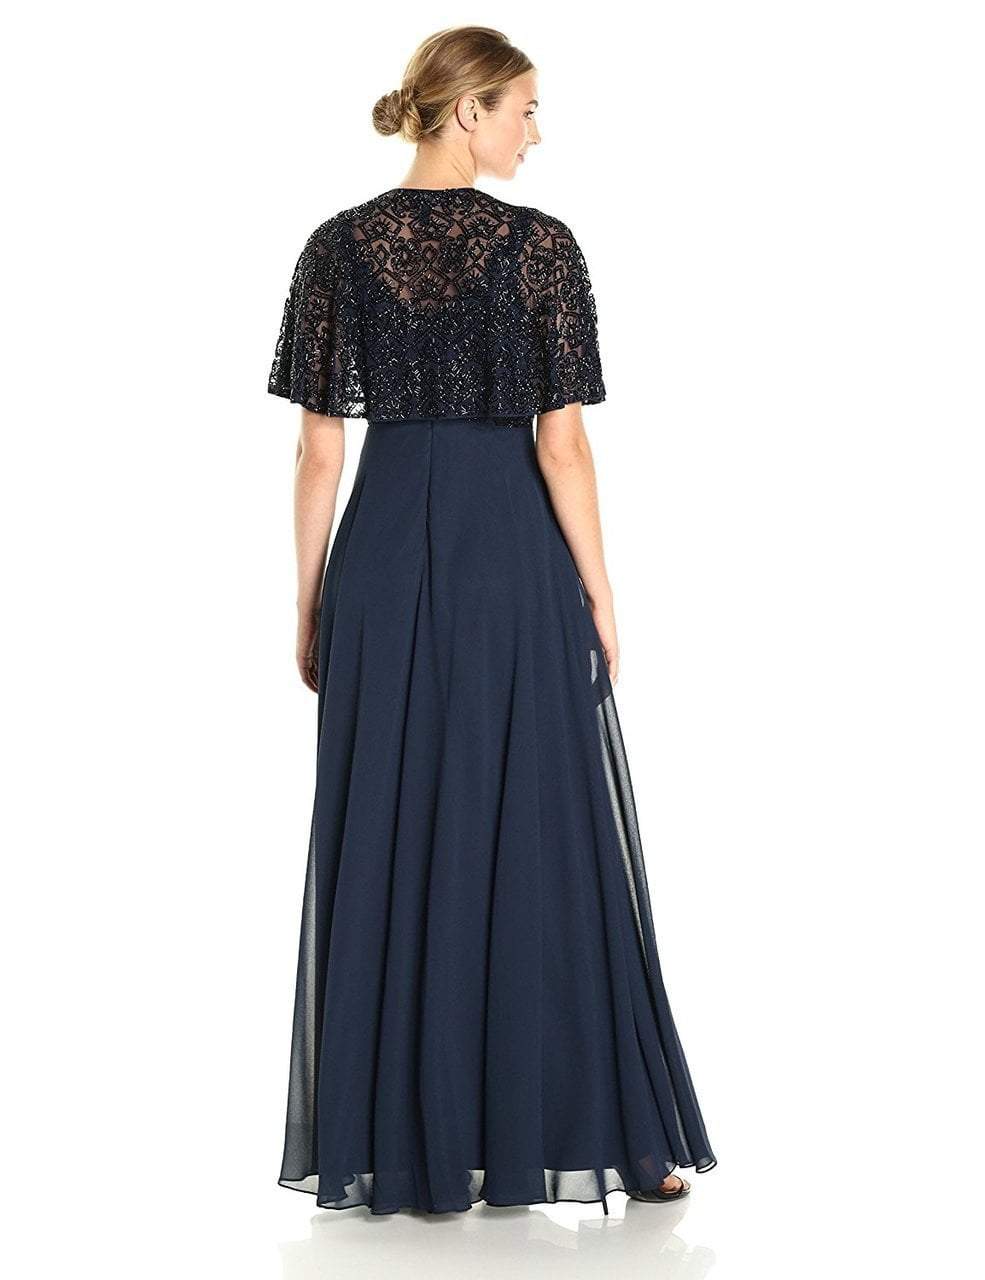 Aidan Mattox - MD1E201185 Embellished Caped Scoop Neck A-Line Gown in Blue and Black